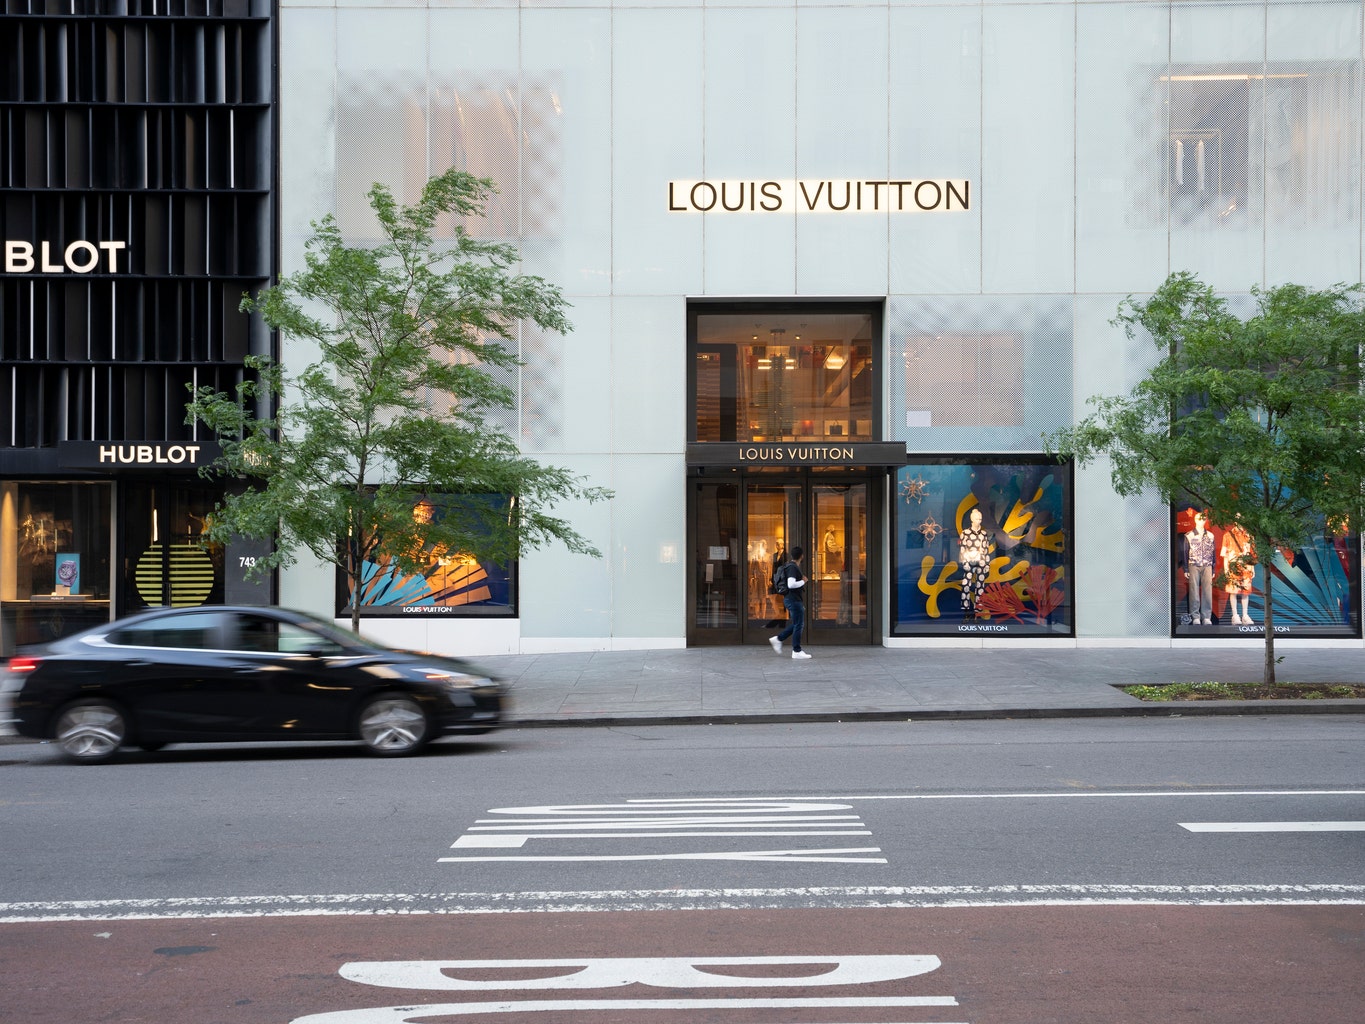 17 of LVMH's most iconic brands – will the French luxury giant add